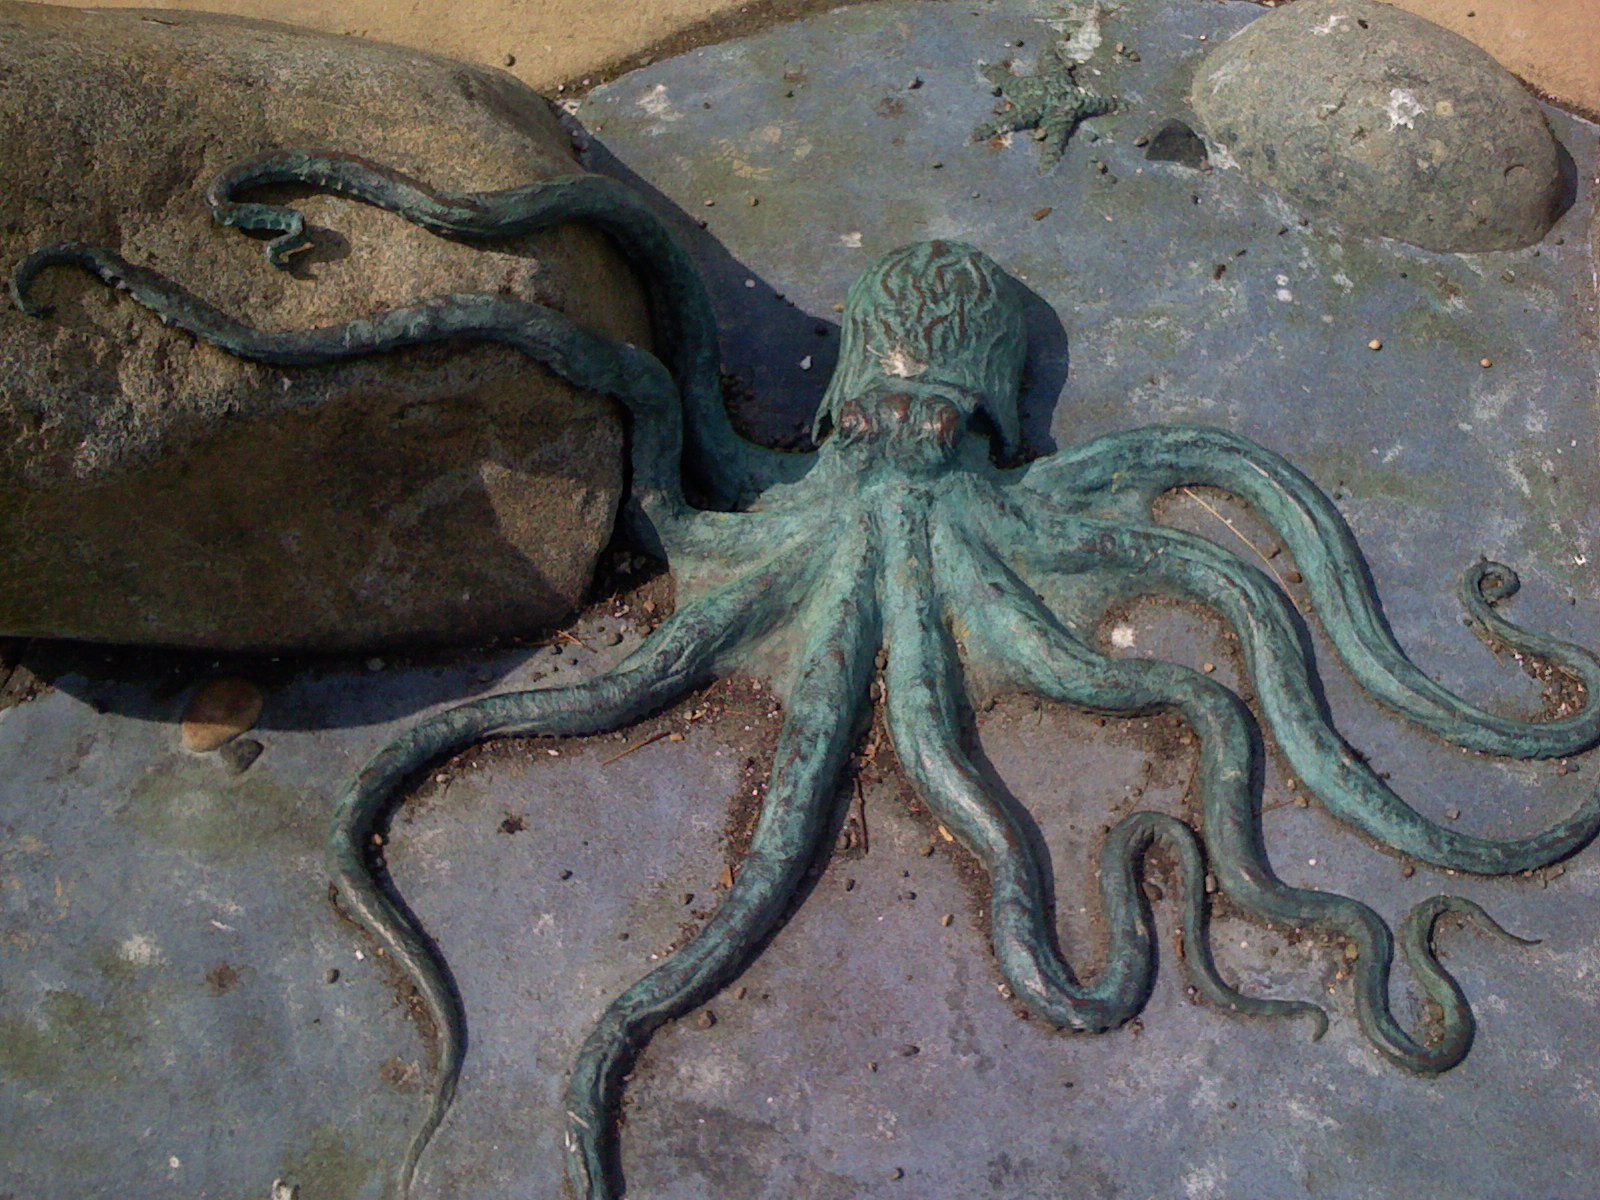 an octo sculpture sitting on the ground by rocks